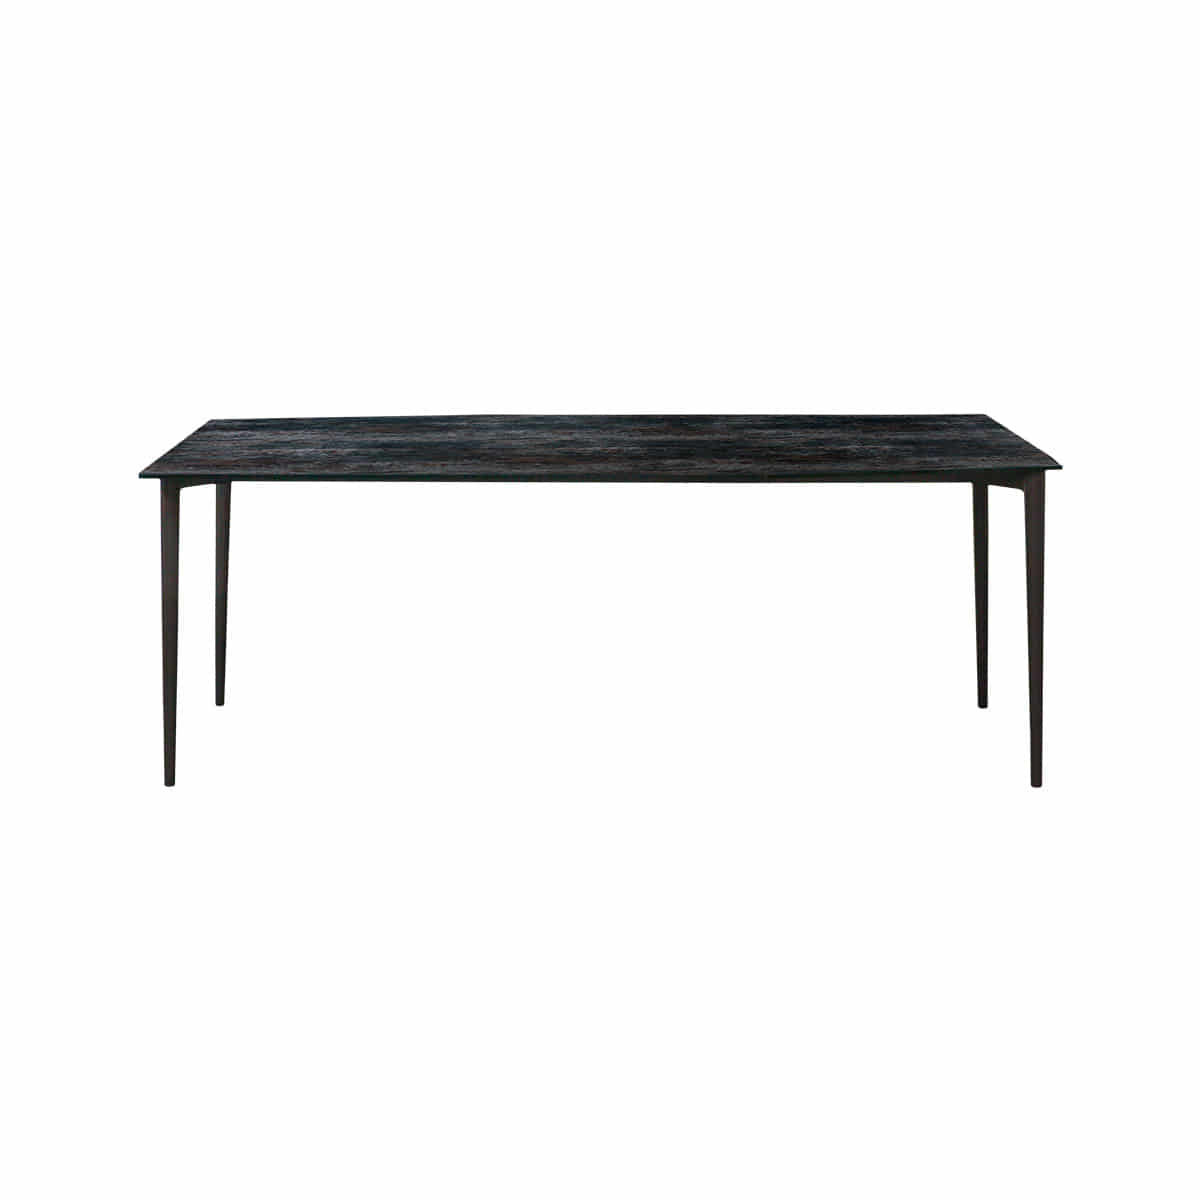 ITALSTUDIOAngle Dining Table 앵글 식탁 (그레이)DESIGNED BY ITALY